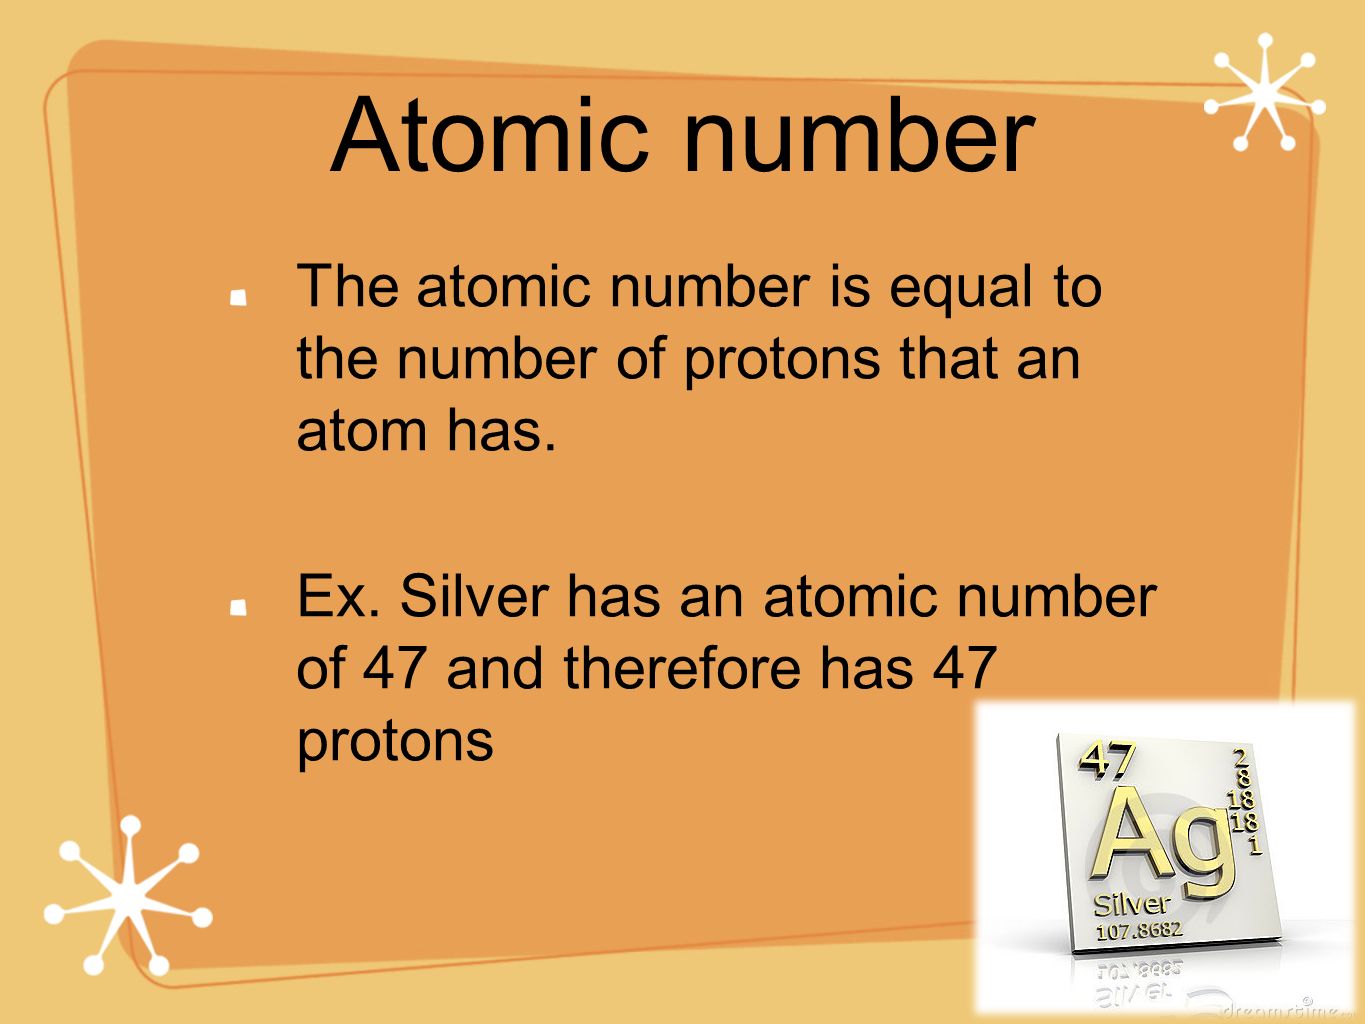 Atomic number The atomic number is equal to the number of protons that an atom has.